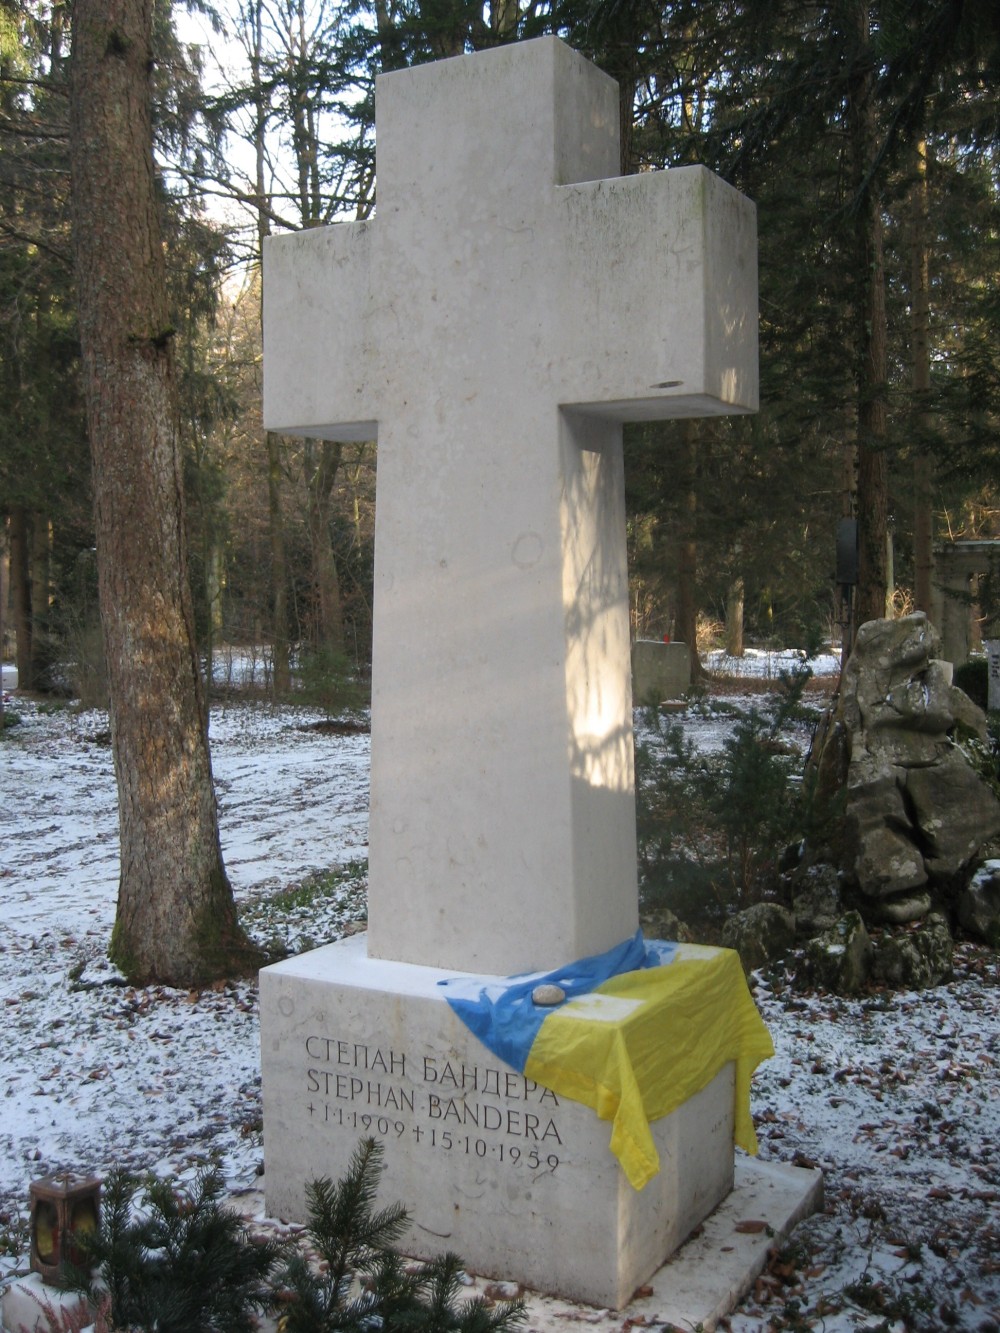 Ukrainian nationalist leader Stepan Bandera was killed and then buried at Waldfriedhof in Munich. Photo: Michael V Owens